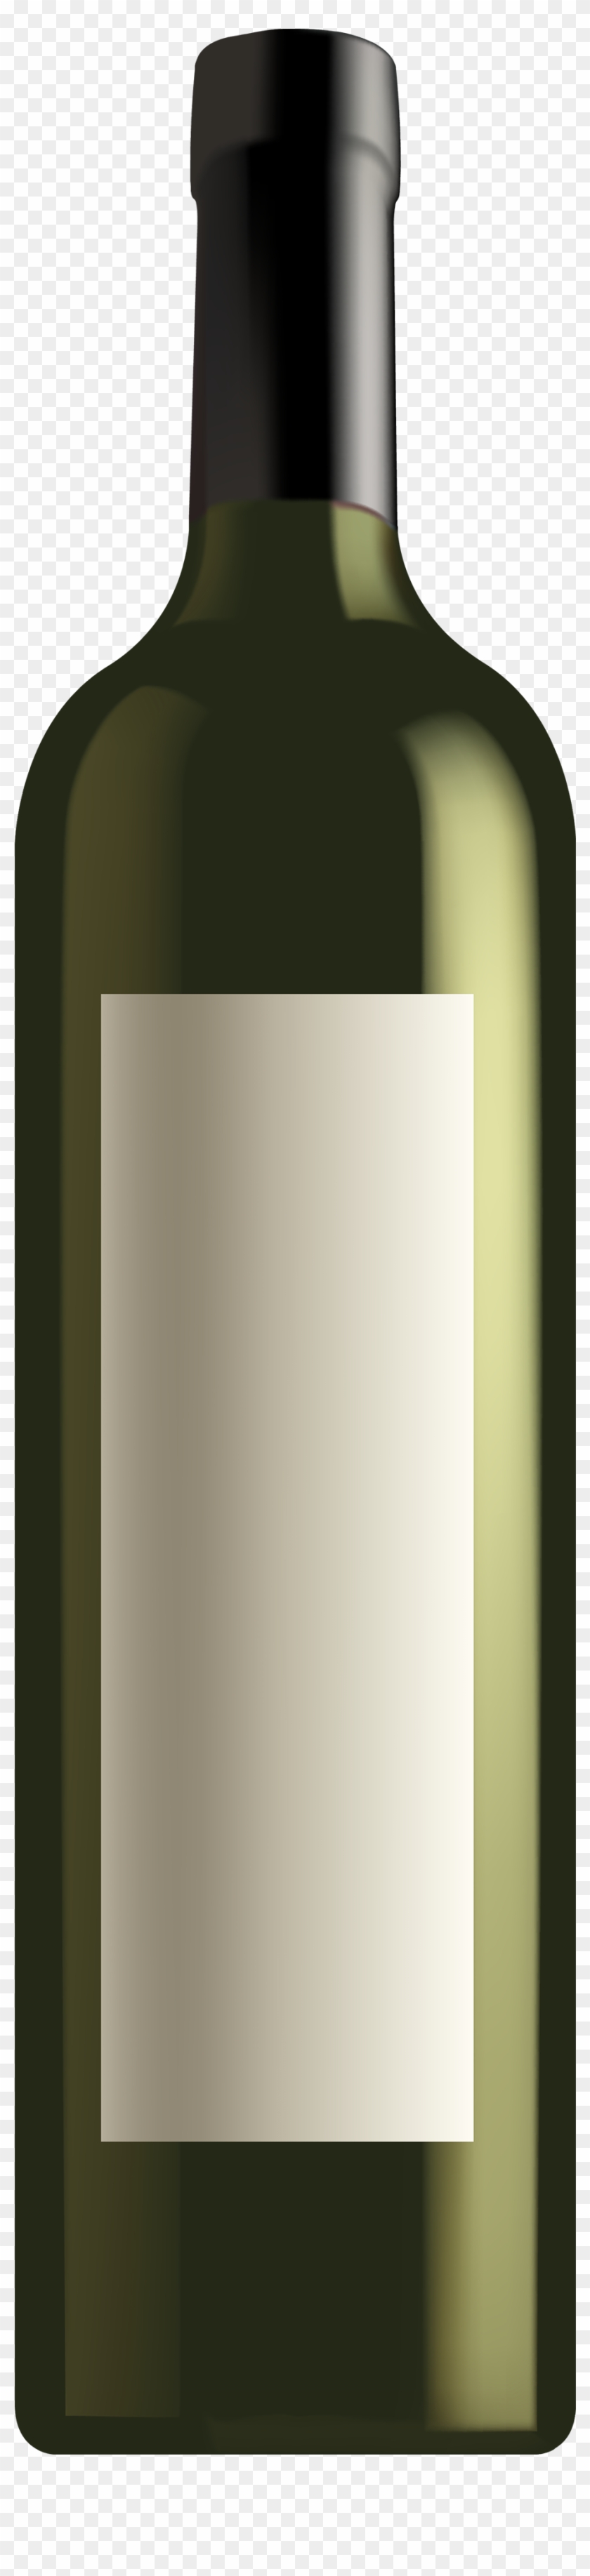 An image of a wine bottle